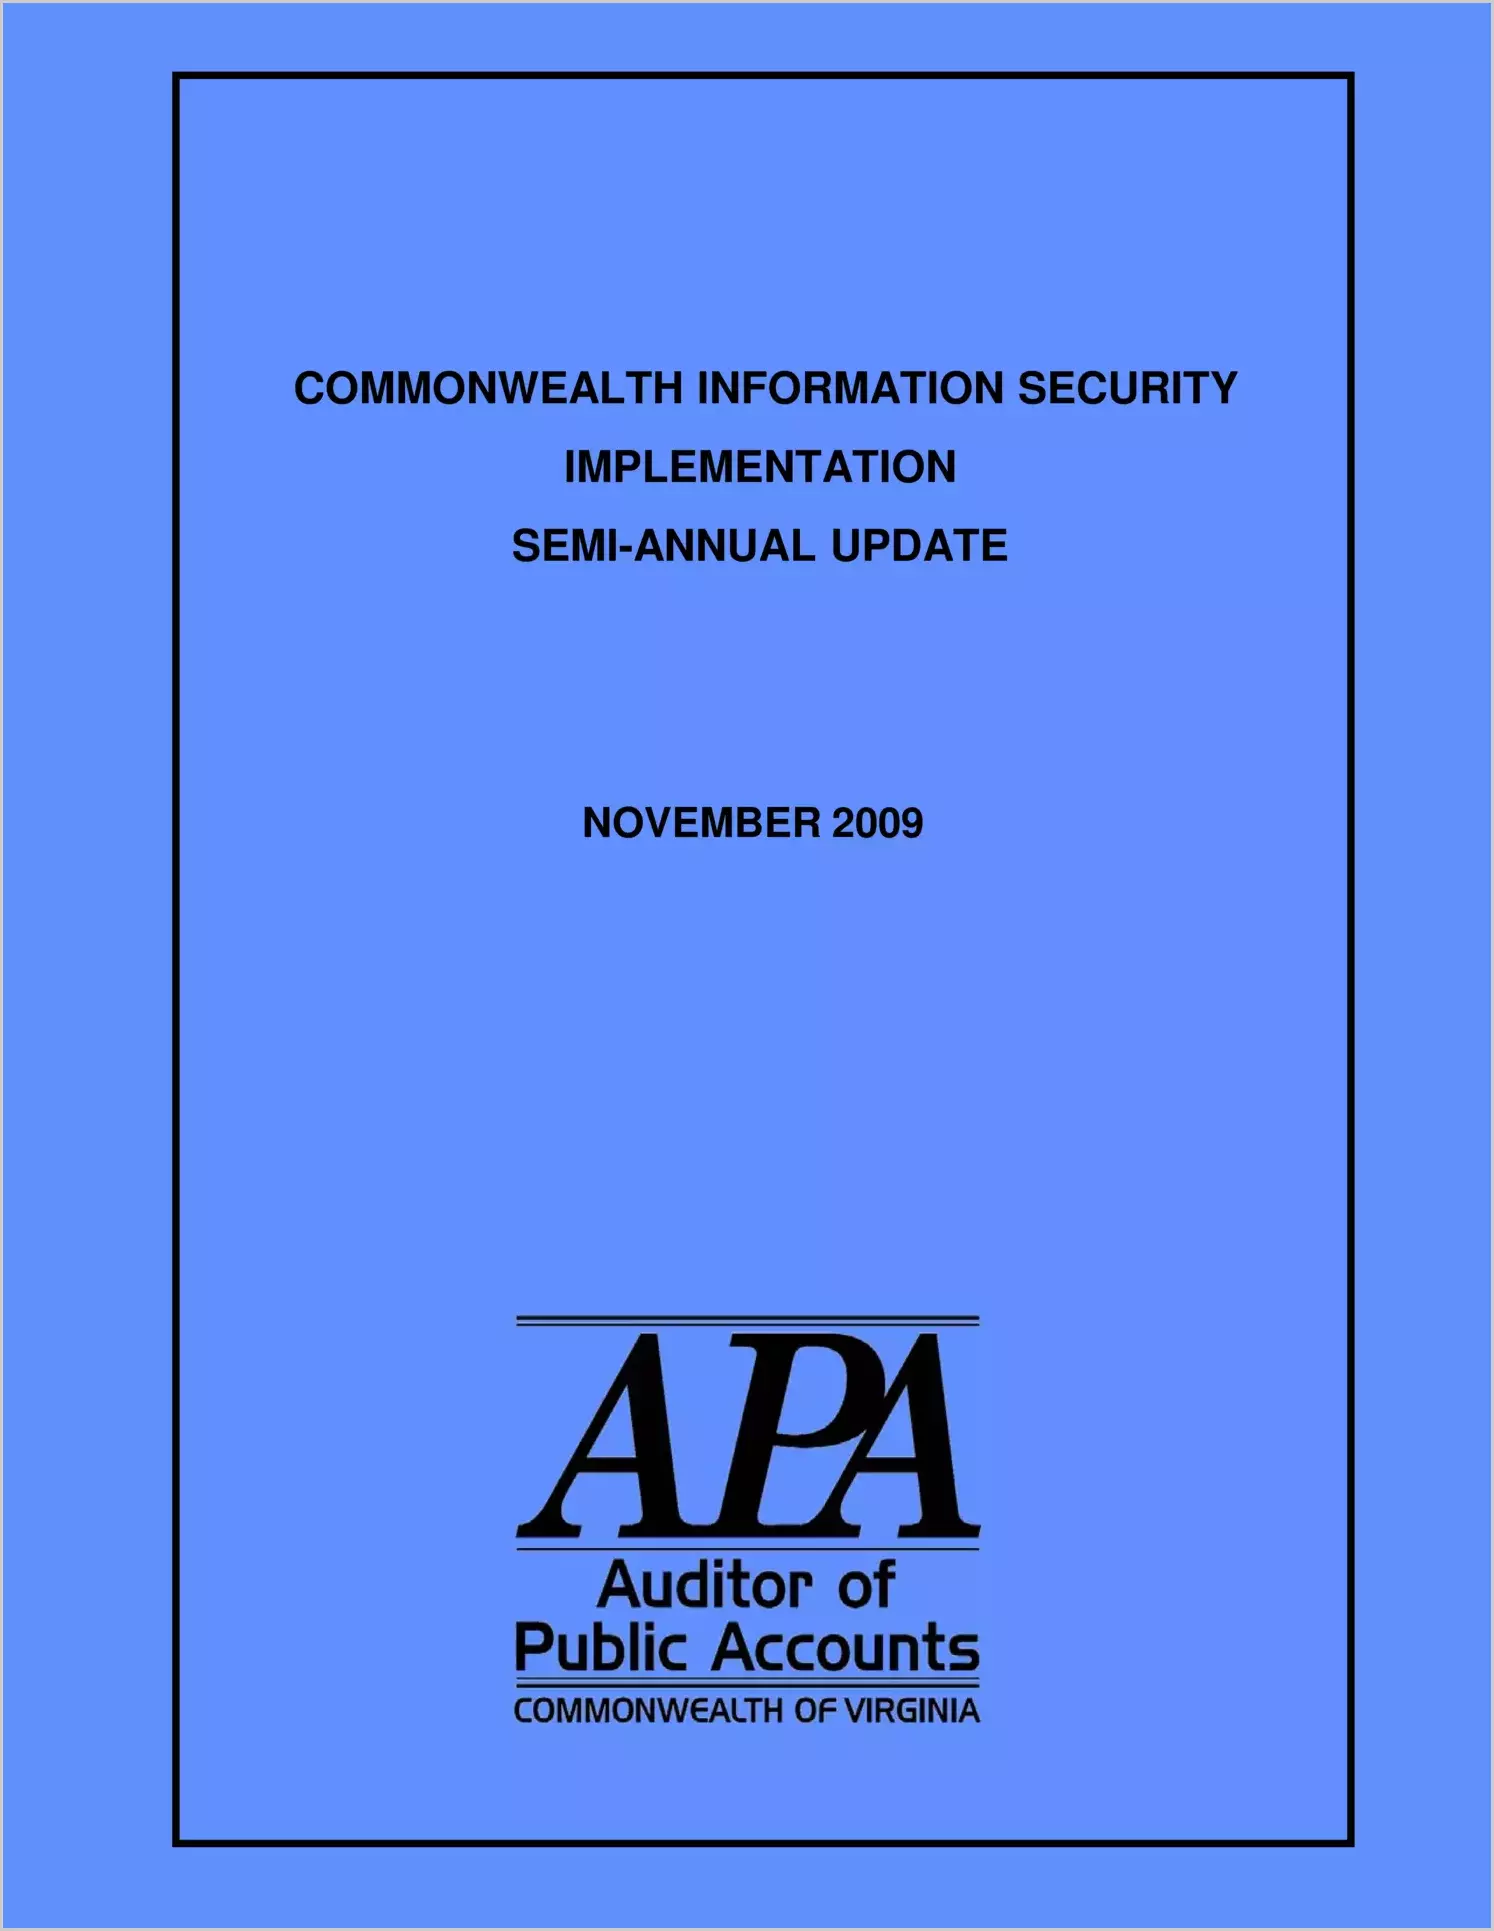 2009 Statewide Review of Information Security in the Commonwealth of Virginia as of December 12, 2008